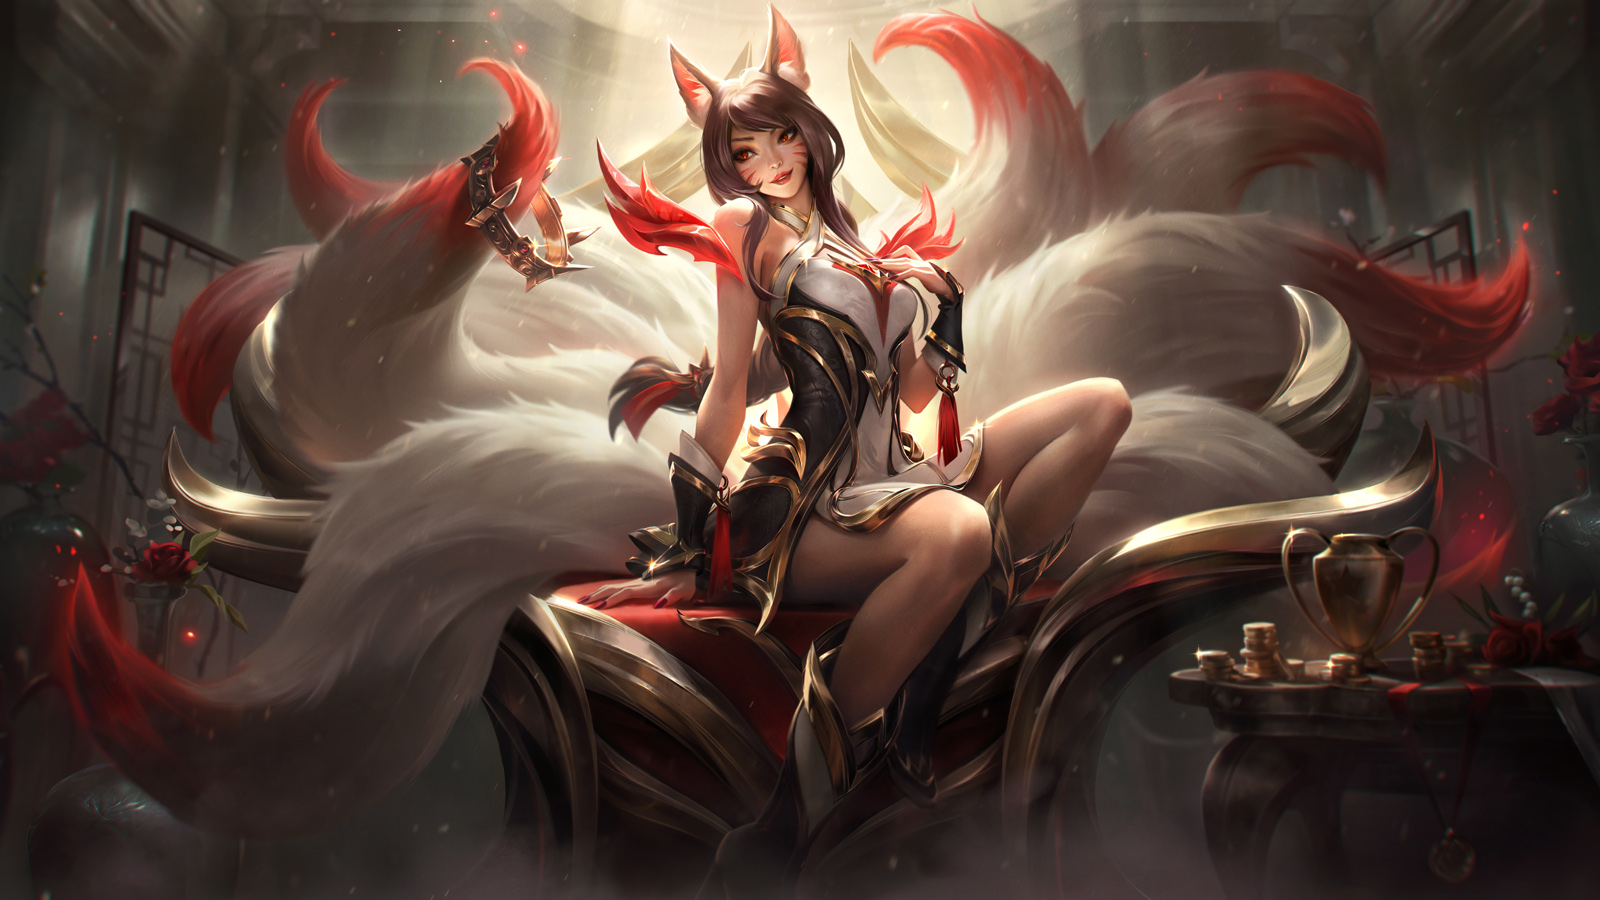 Risen Legend Ahri splashart in League of Legends, showing a nine-tailed fox woman lounging amidst tokens from fans, trophies, a crown, and other signs of wealth and success.